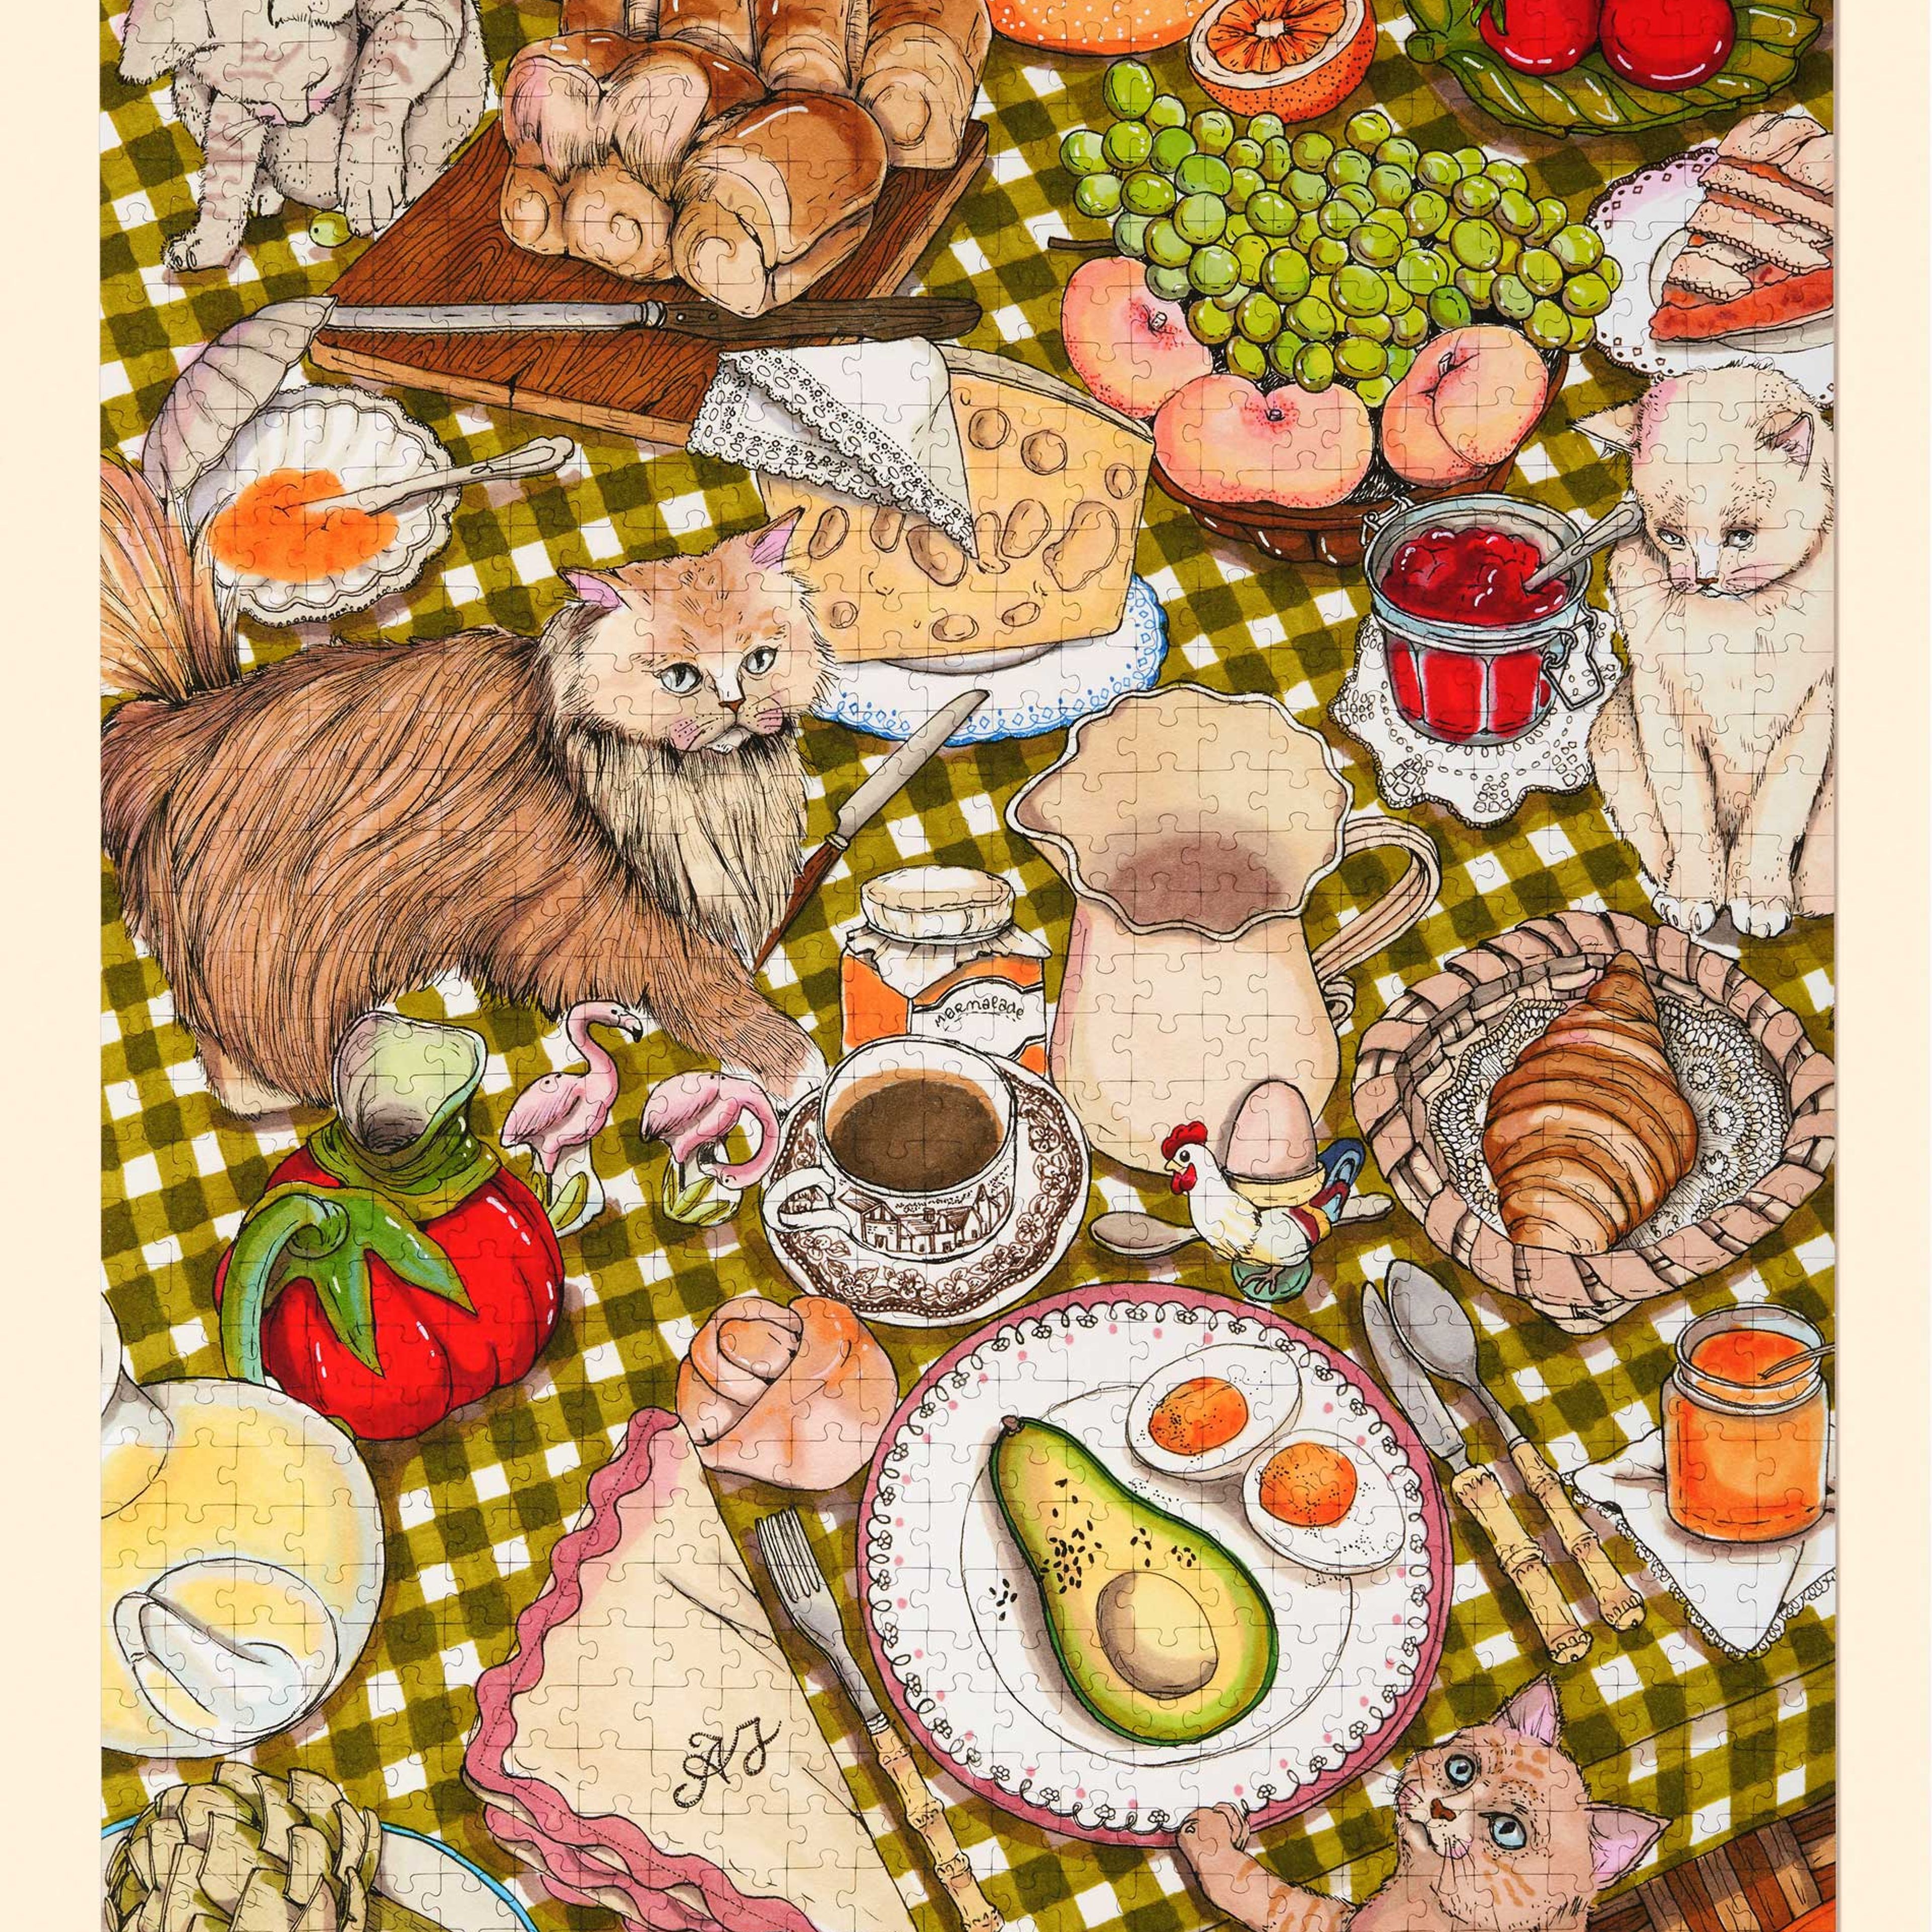 Brunch and Cats Puzzle by Ana Jaren